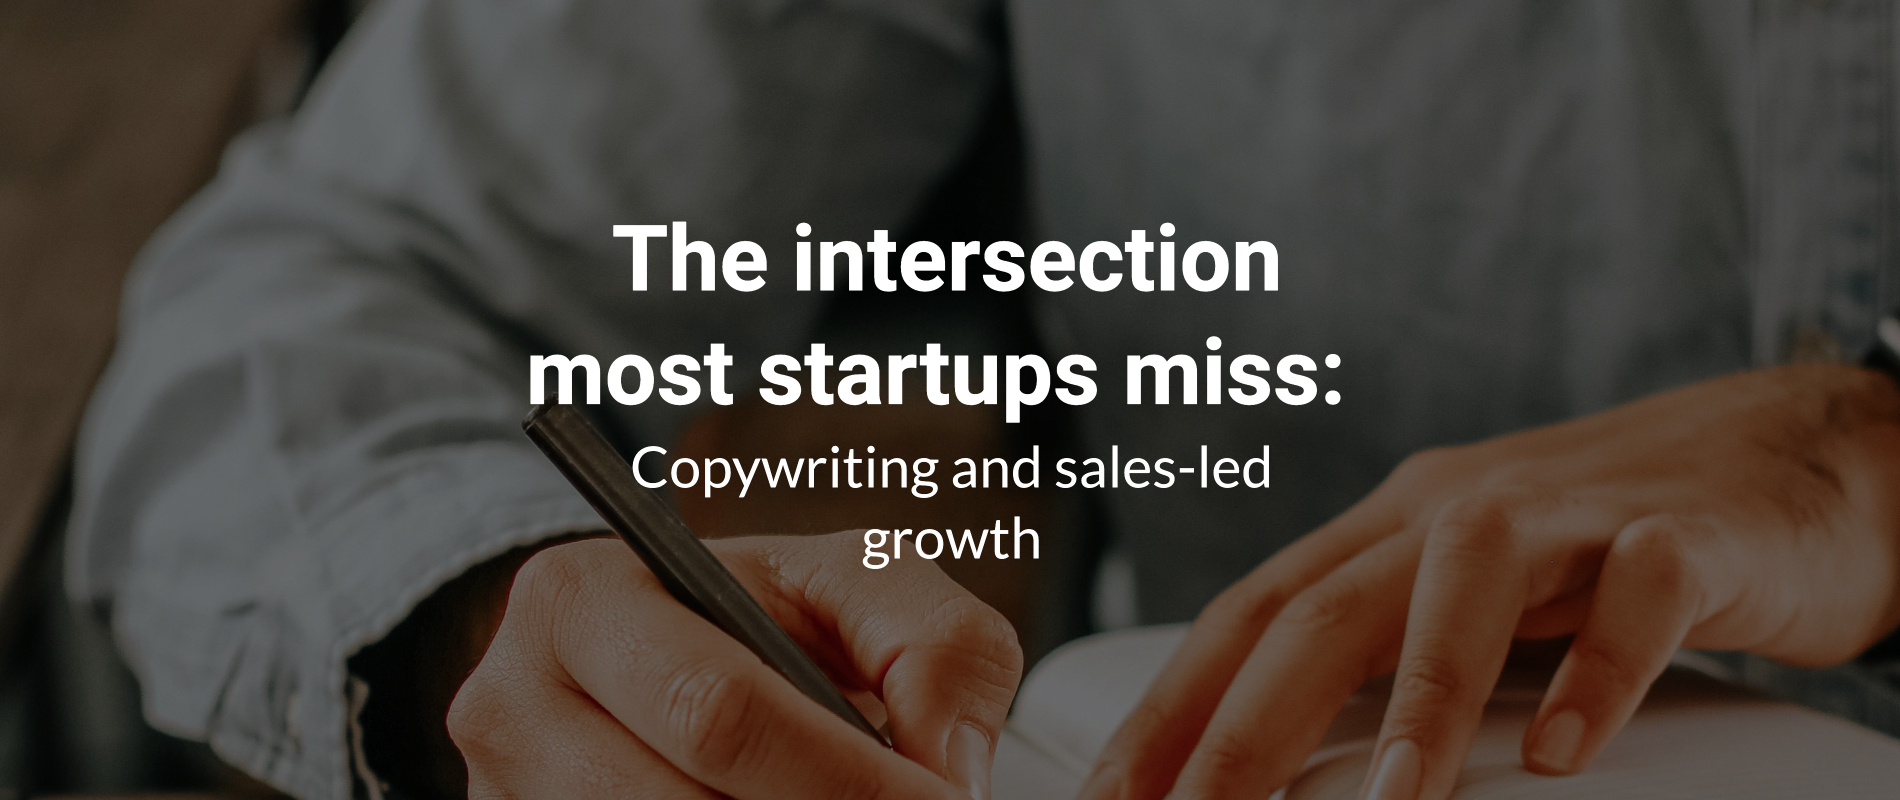 The intersection most startups miss: Copywriting and sales-led growth